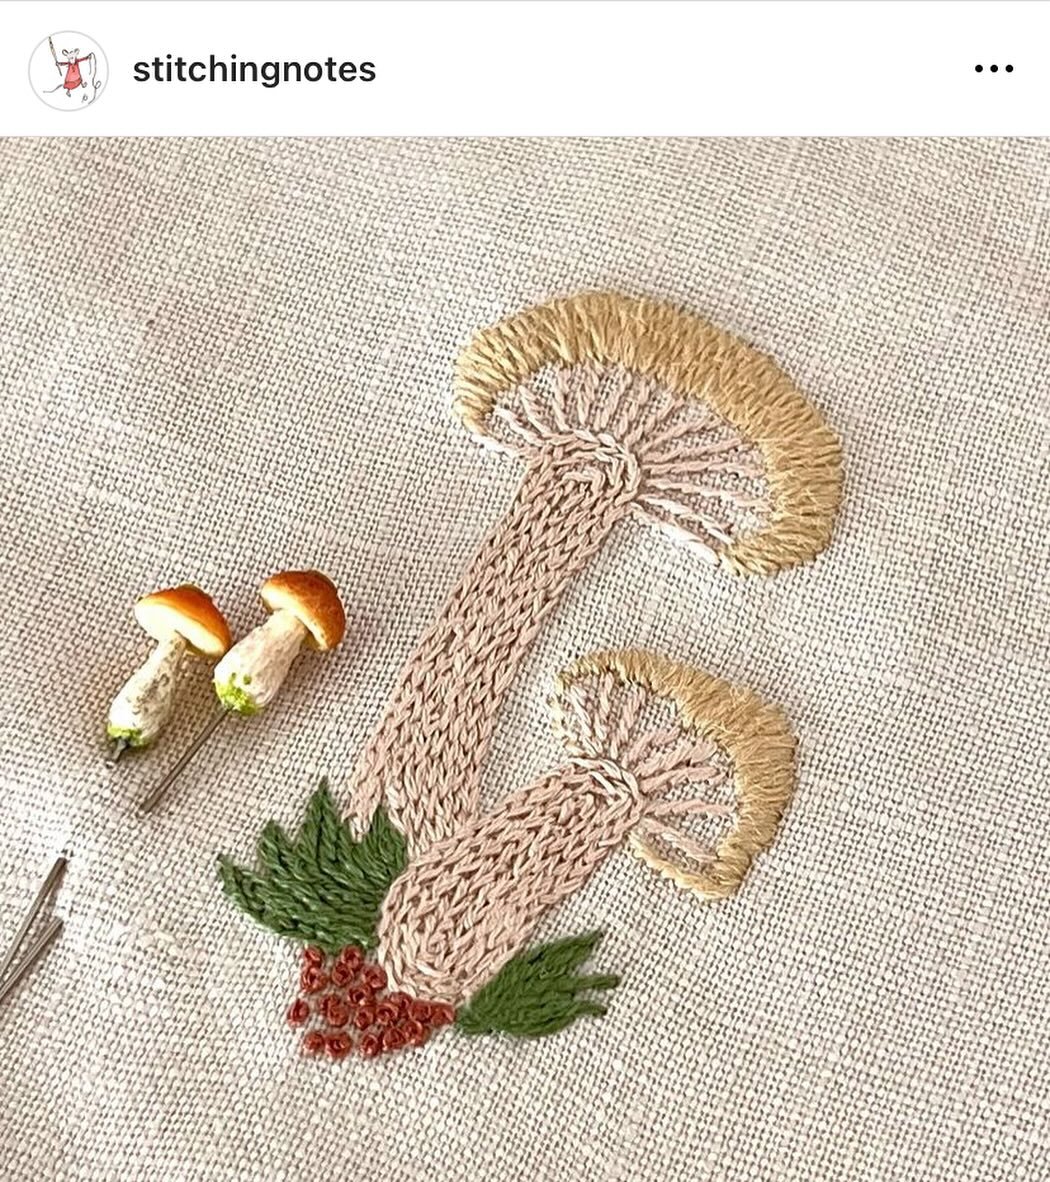 @stitchingnotes shared this beautiful project that she&rsquo;s working on from our #simplystitchedwithwool book by @yumikohiguchi 
We just love to see everything that Larisa does, so inspiring 😍
Find this book and more at the link in our profile.
.
